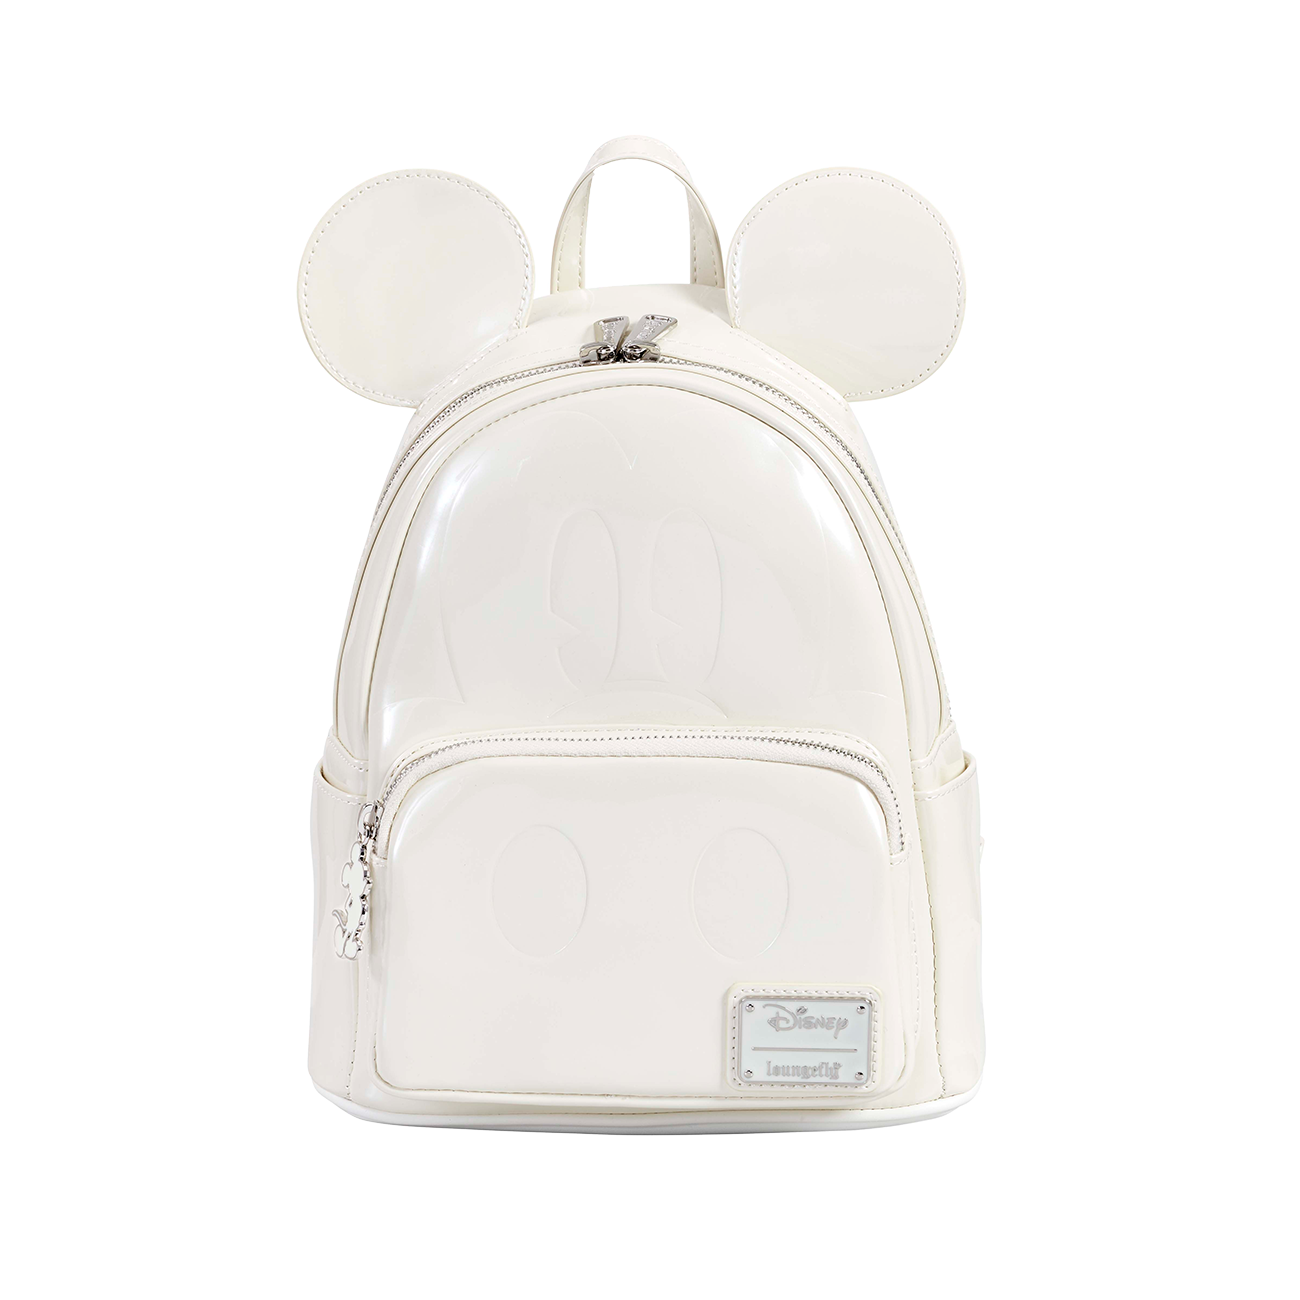 MICKEY MOUSE PEARL COSPLAY MINI BACKPACK - DISNEY